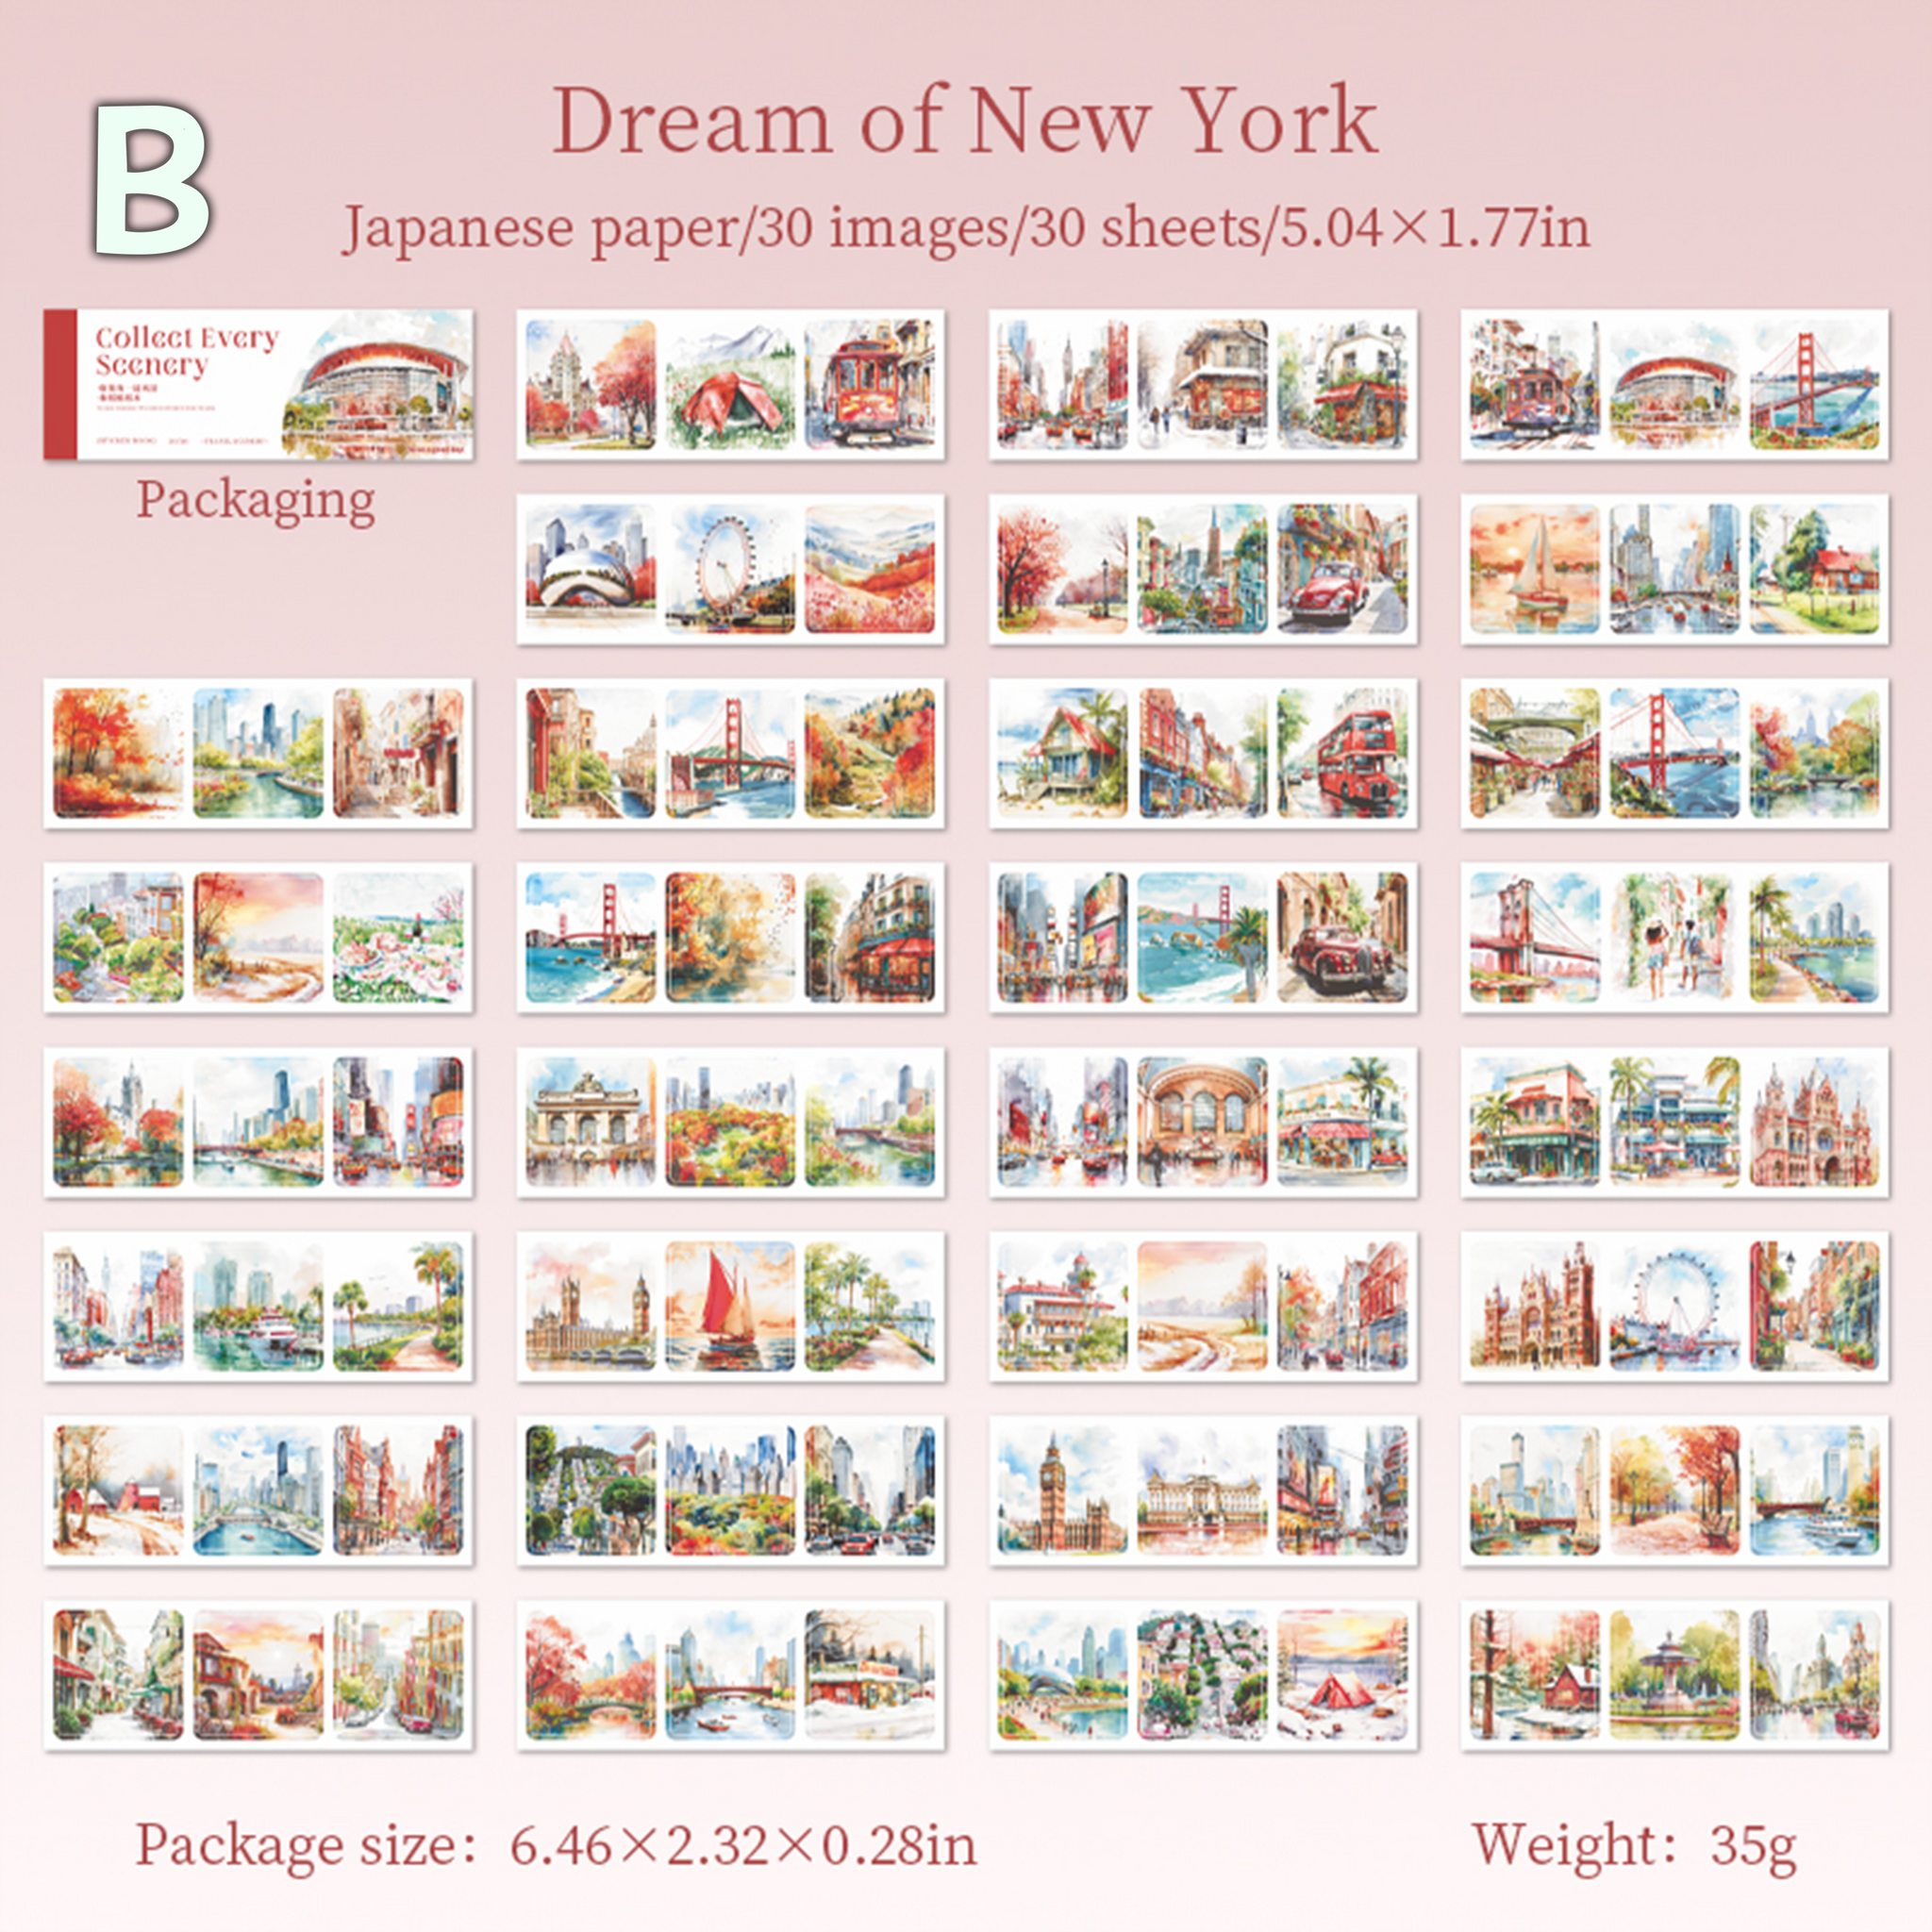 Collect Every Scenery Washi Sticker Book